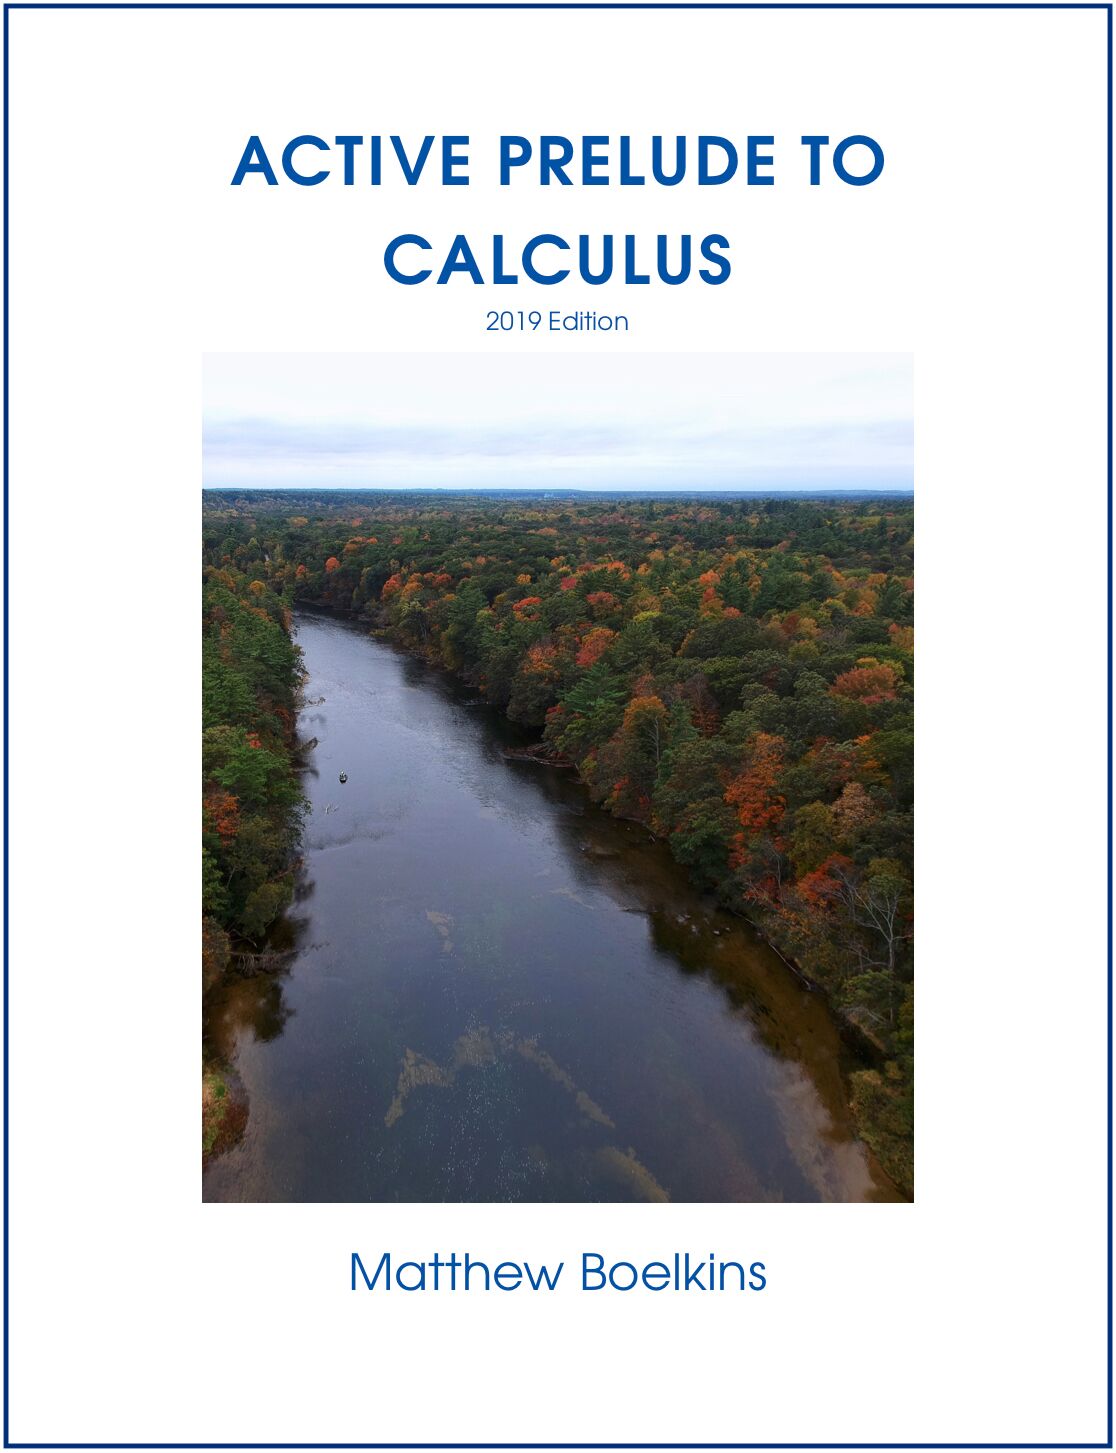 Active Prelude to Calculus 2019 Edition